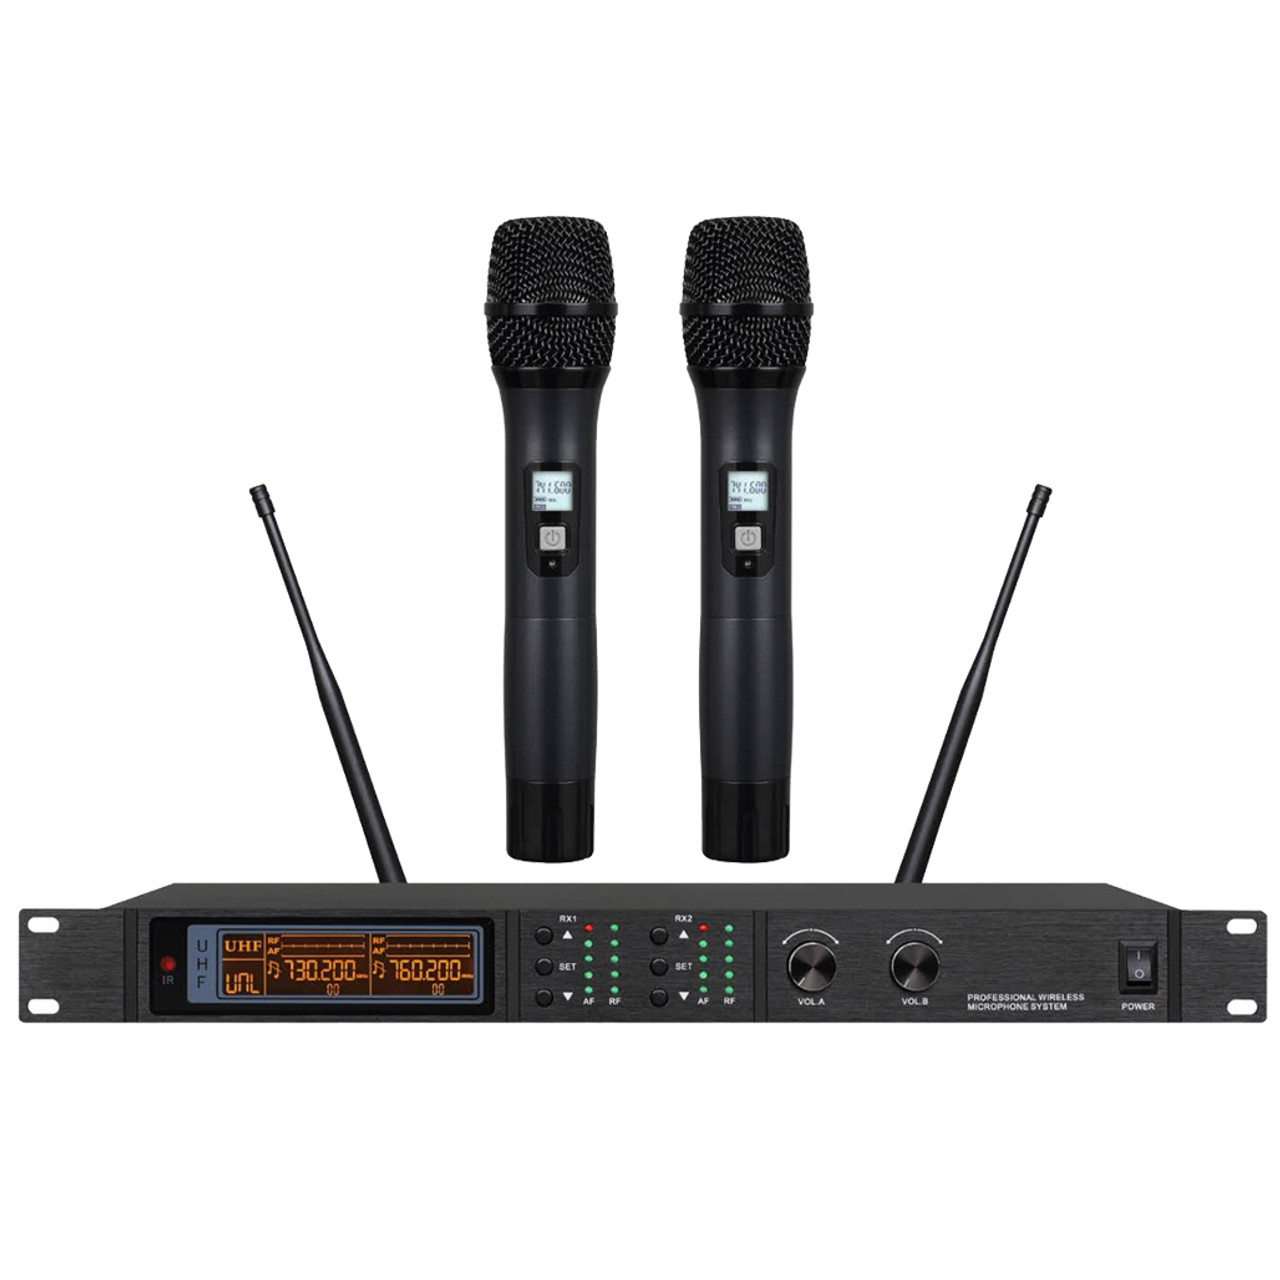 UHF Professional Wireless Microphone 2 Channel (C12)